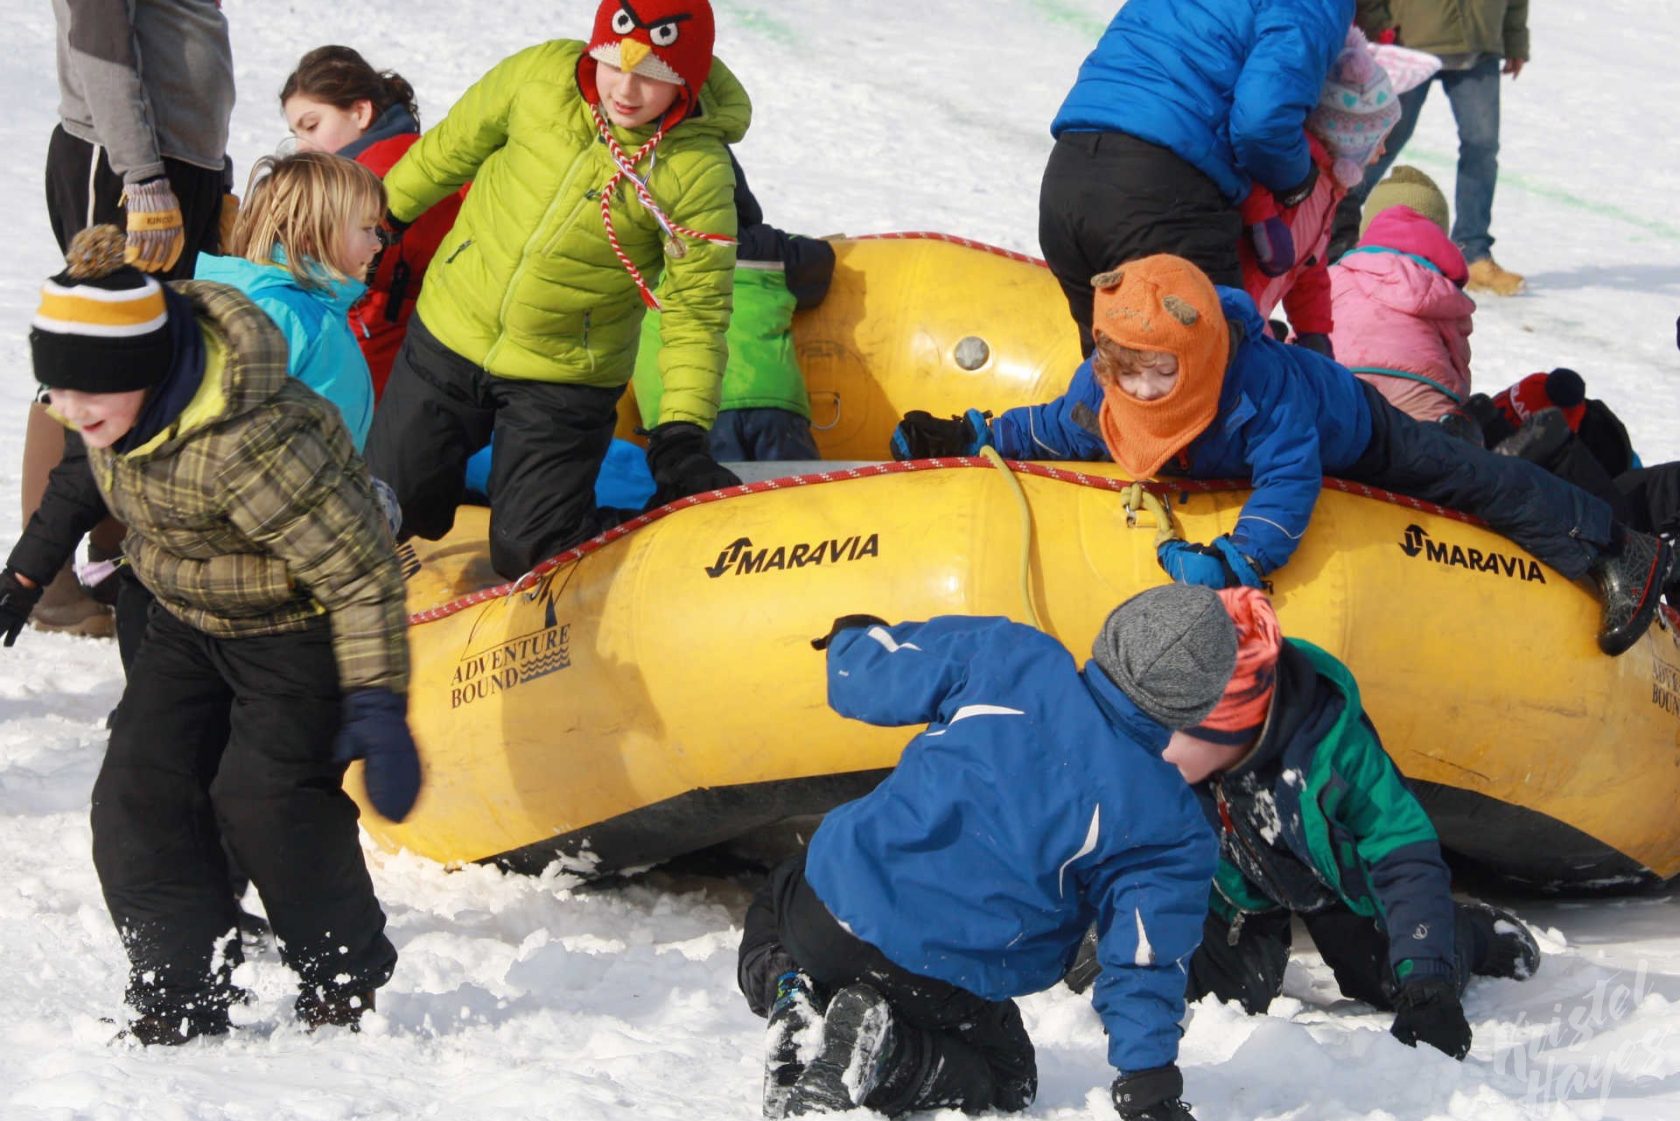 Welcome to Winter Festival | Kids Jumping Out of Sled